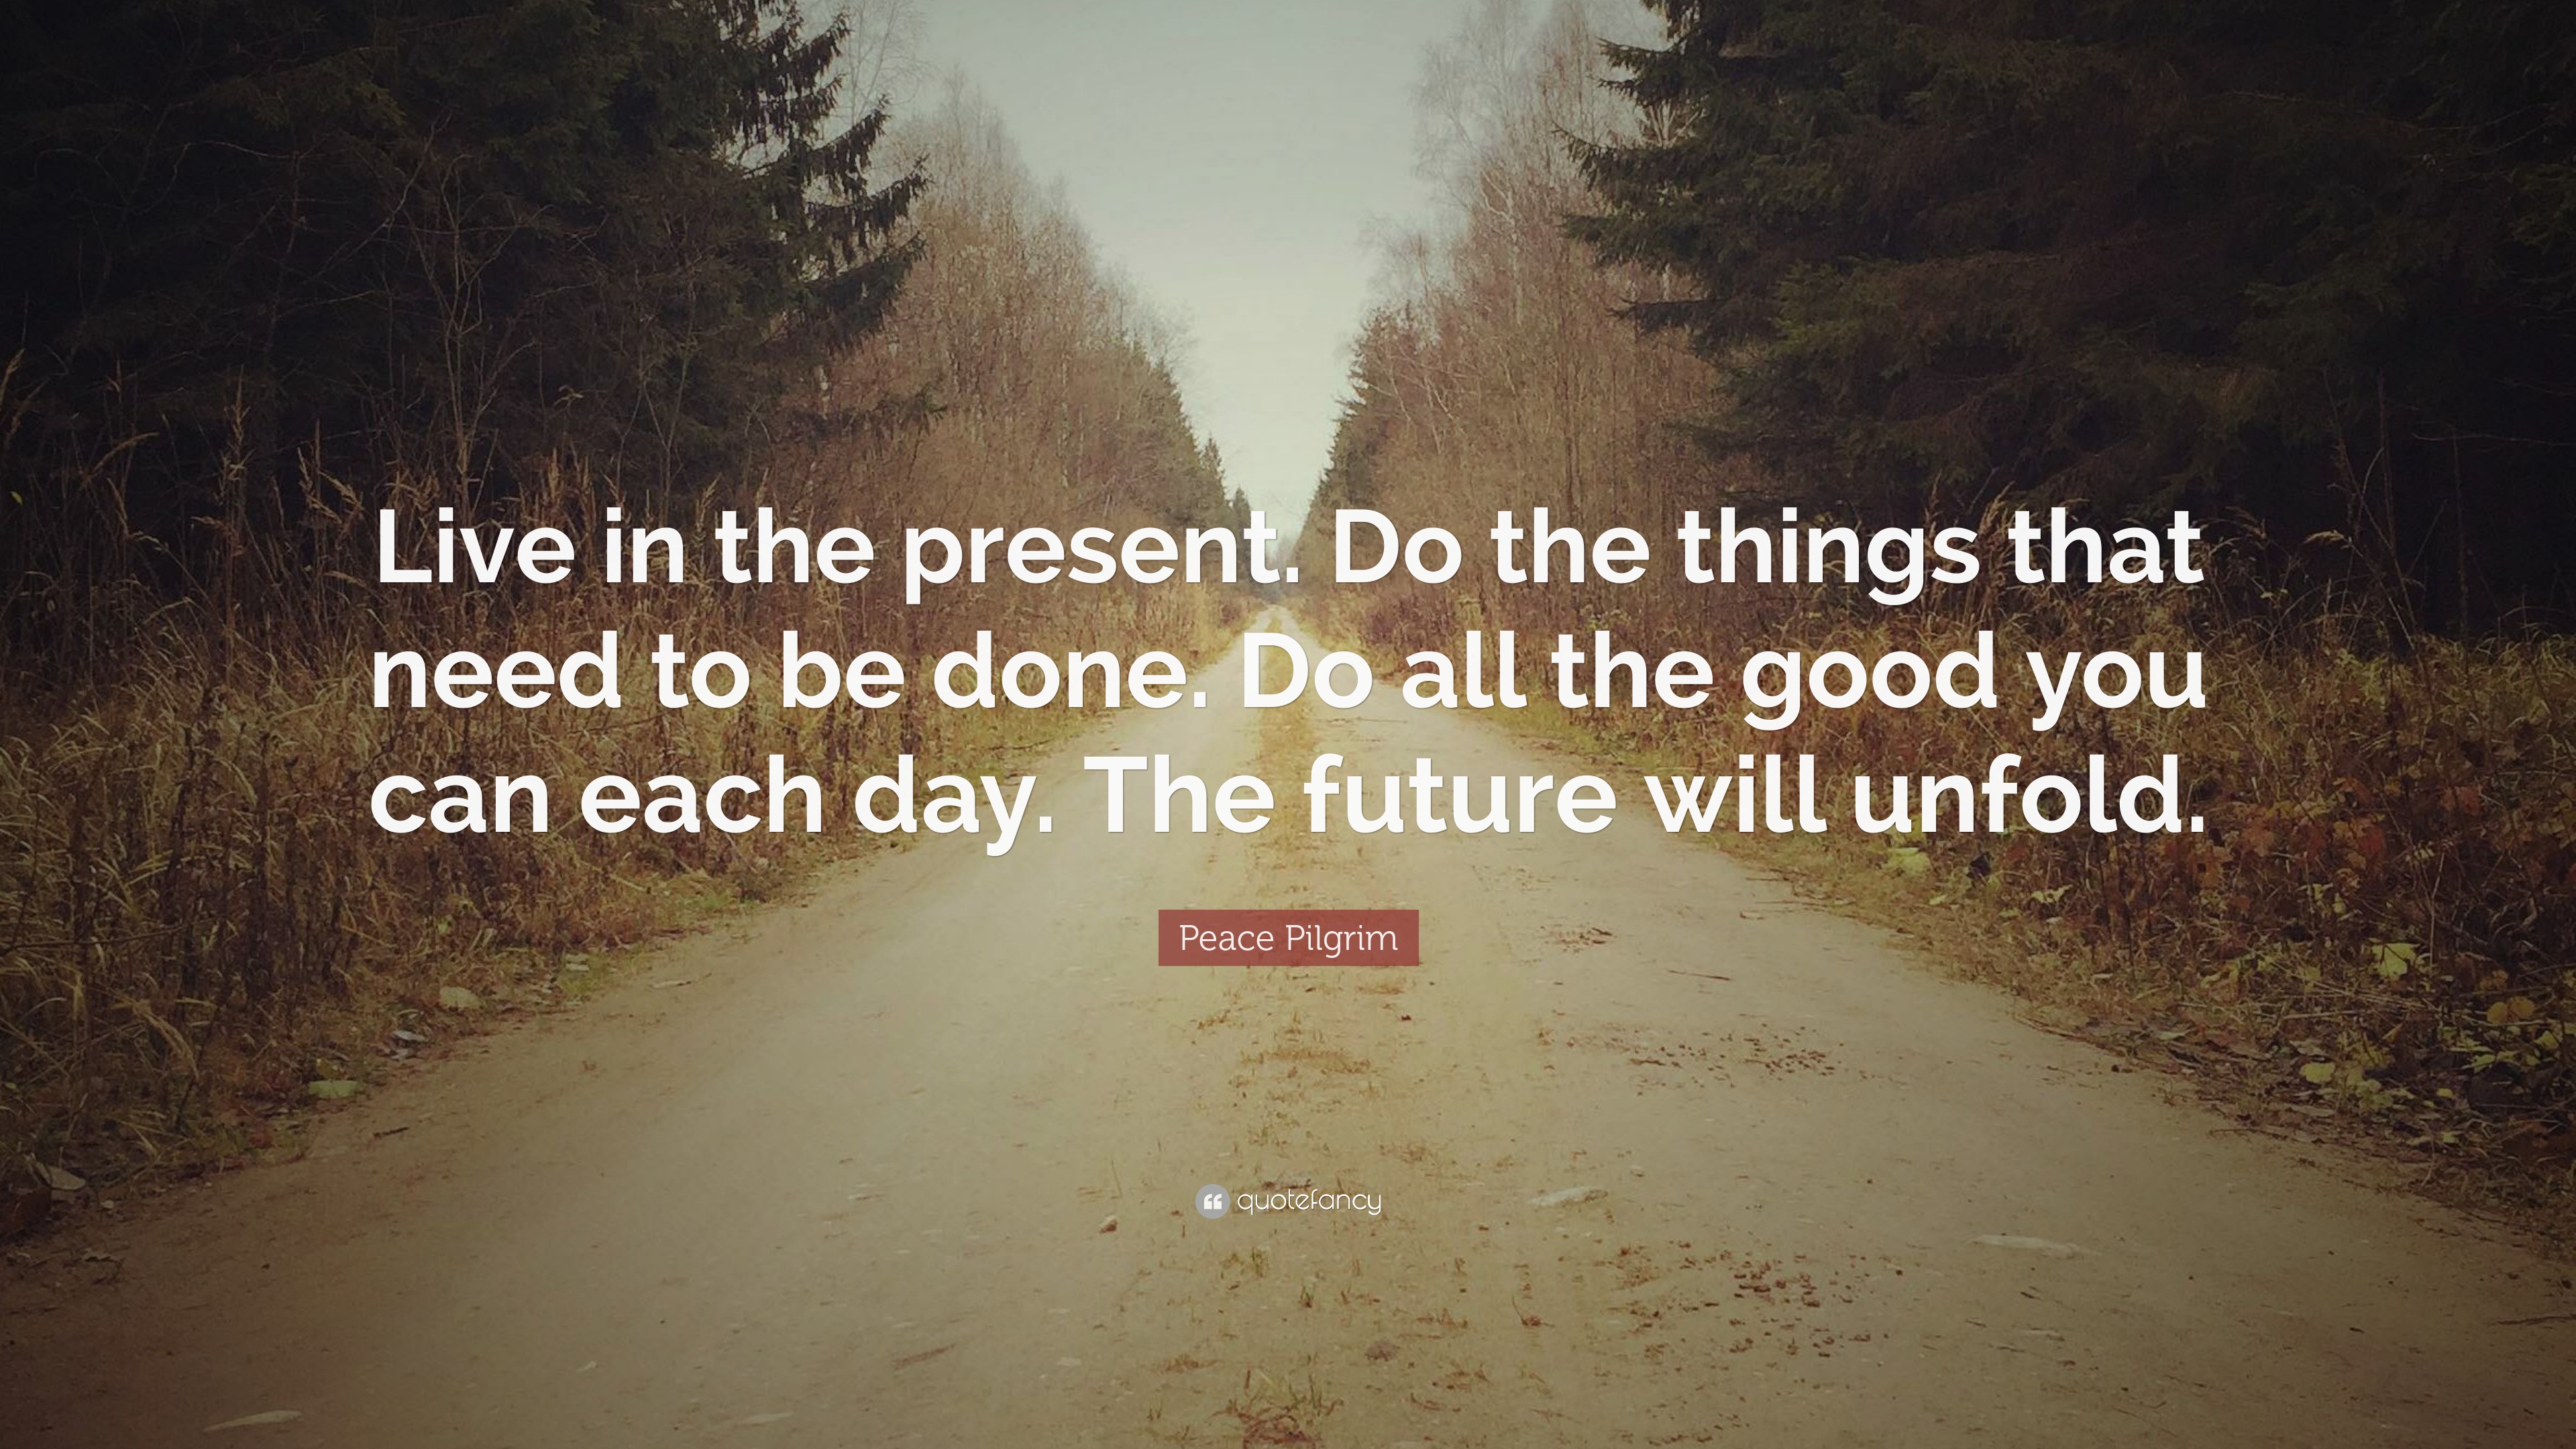 Peace Pilgrim Quote: "Live in the present. Do the things that need to be done. Do all the good ...